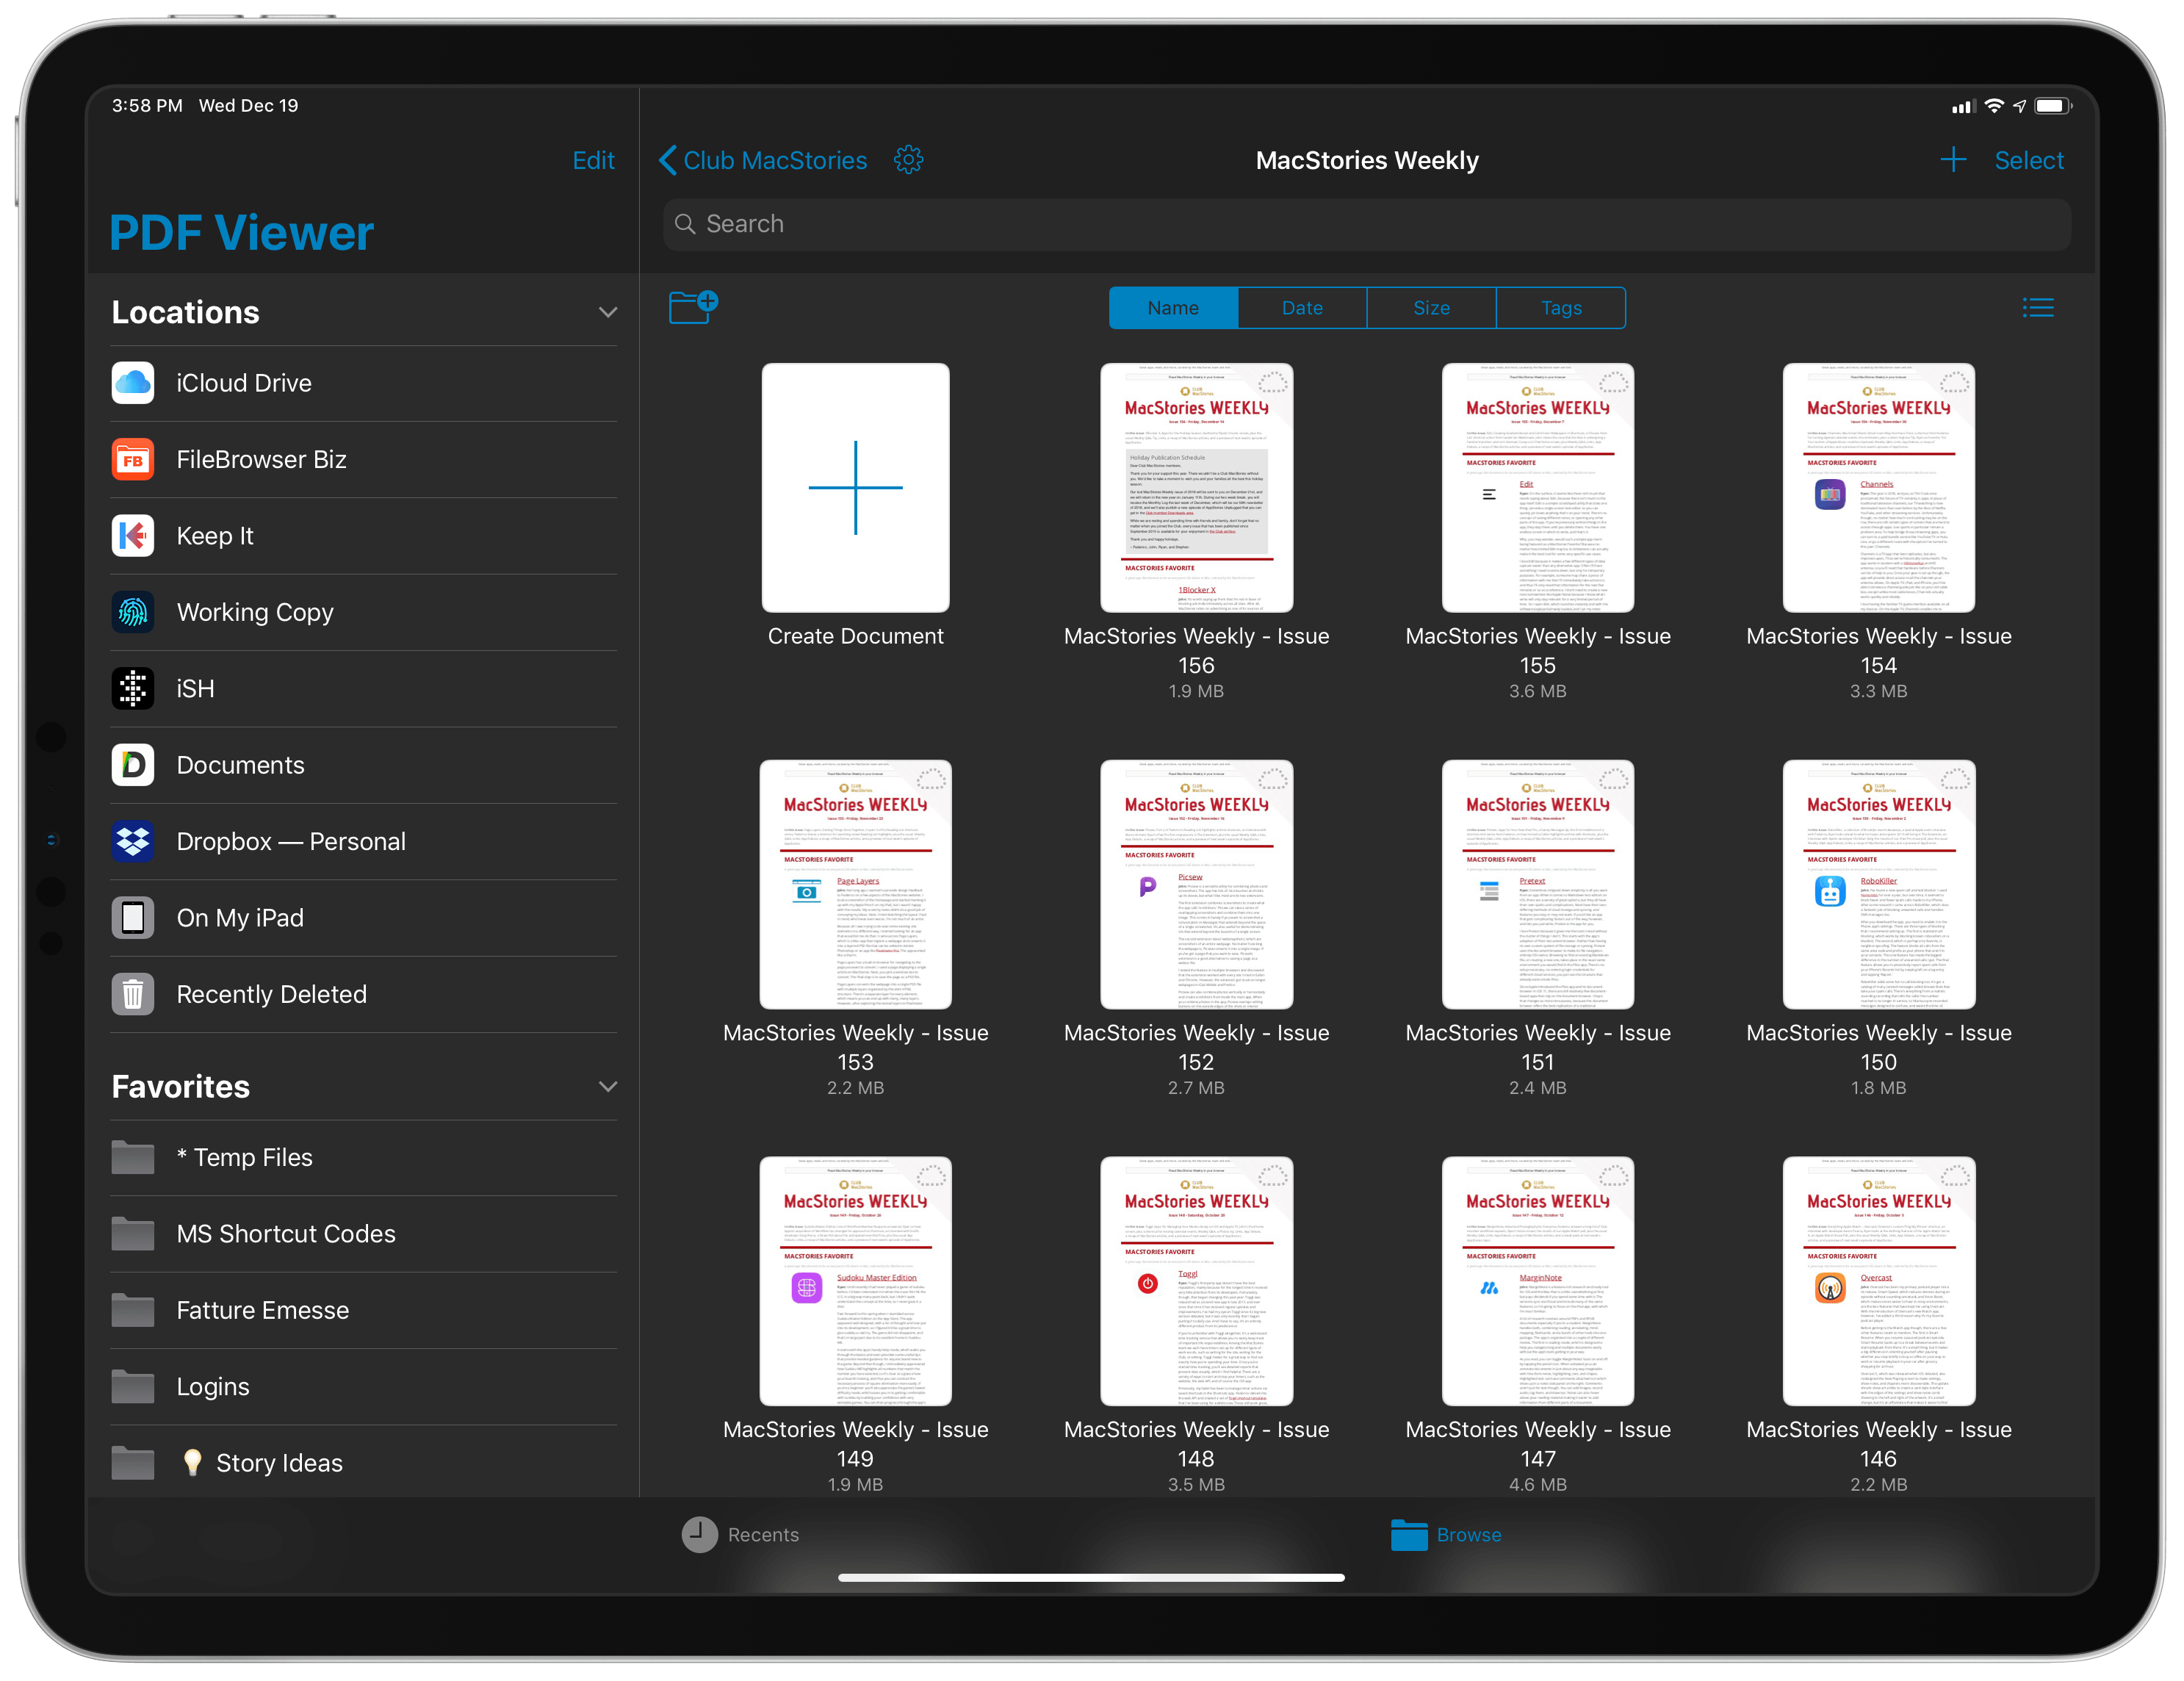 PDF Viewer uses the standard Files view as its main library page.